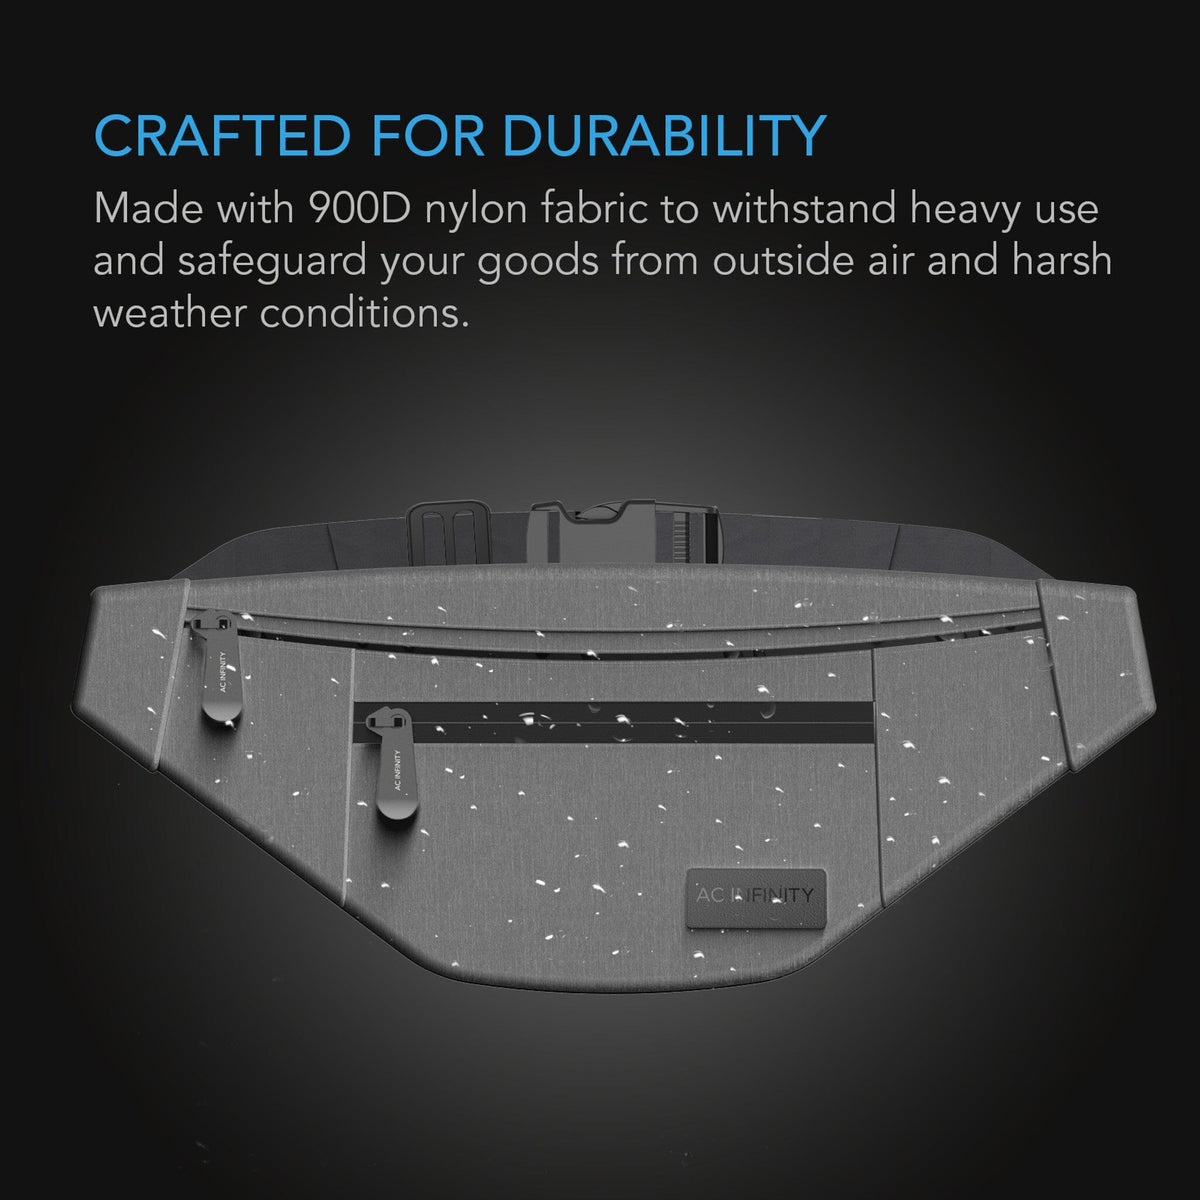 Crafted for durability belt bag 